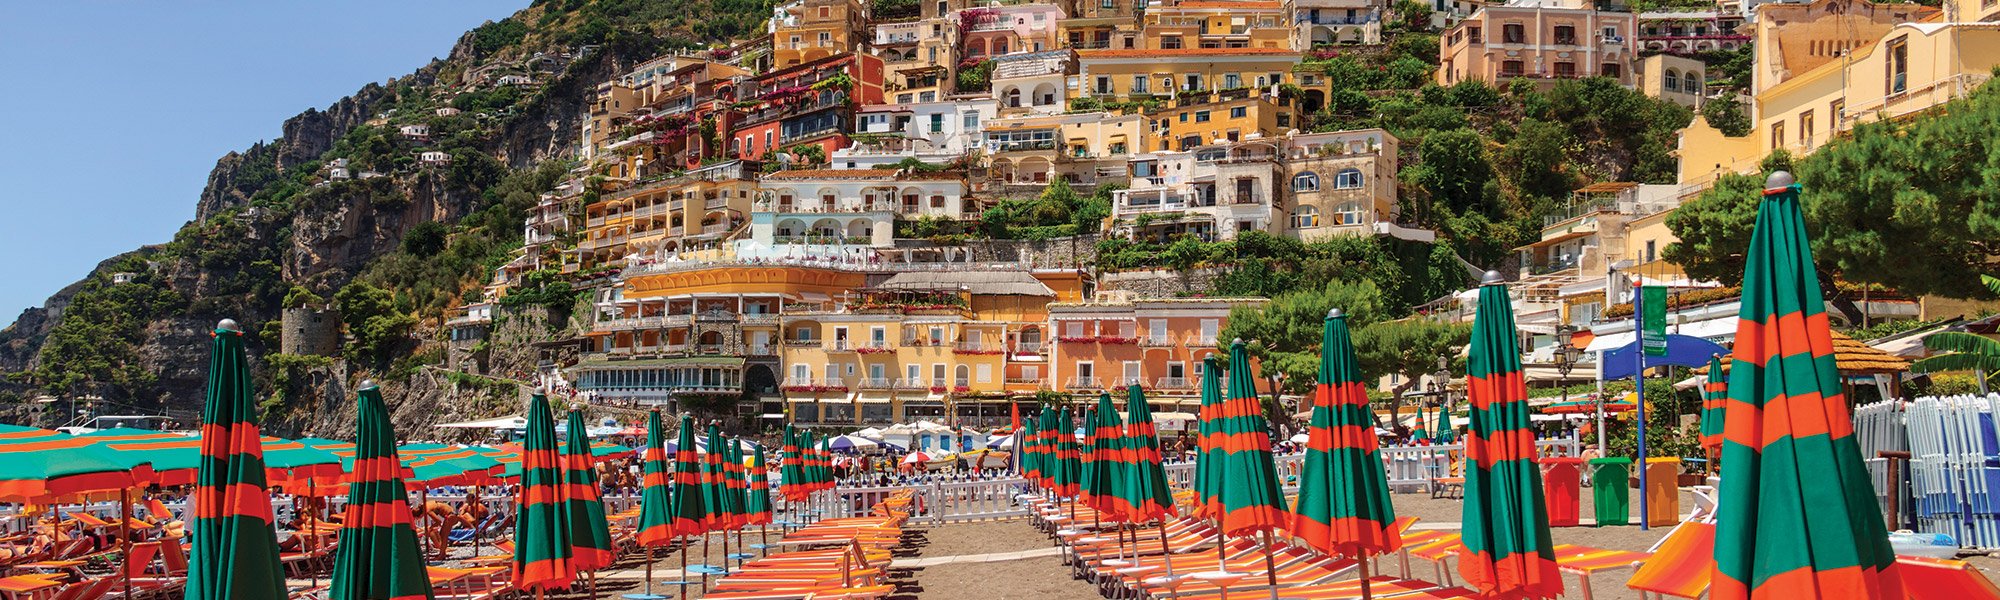 Image of a beach on the Amalfi Coast next to a cliff covered in brightly painted buildings